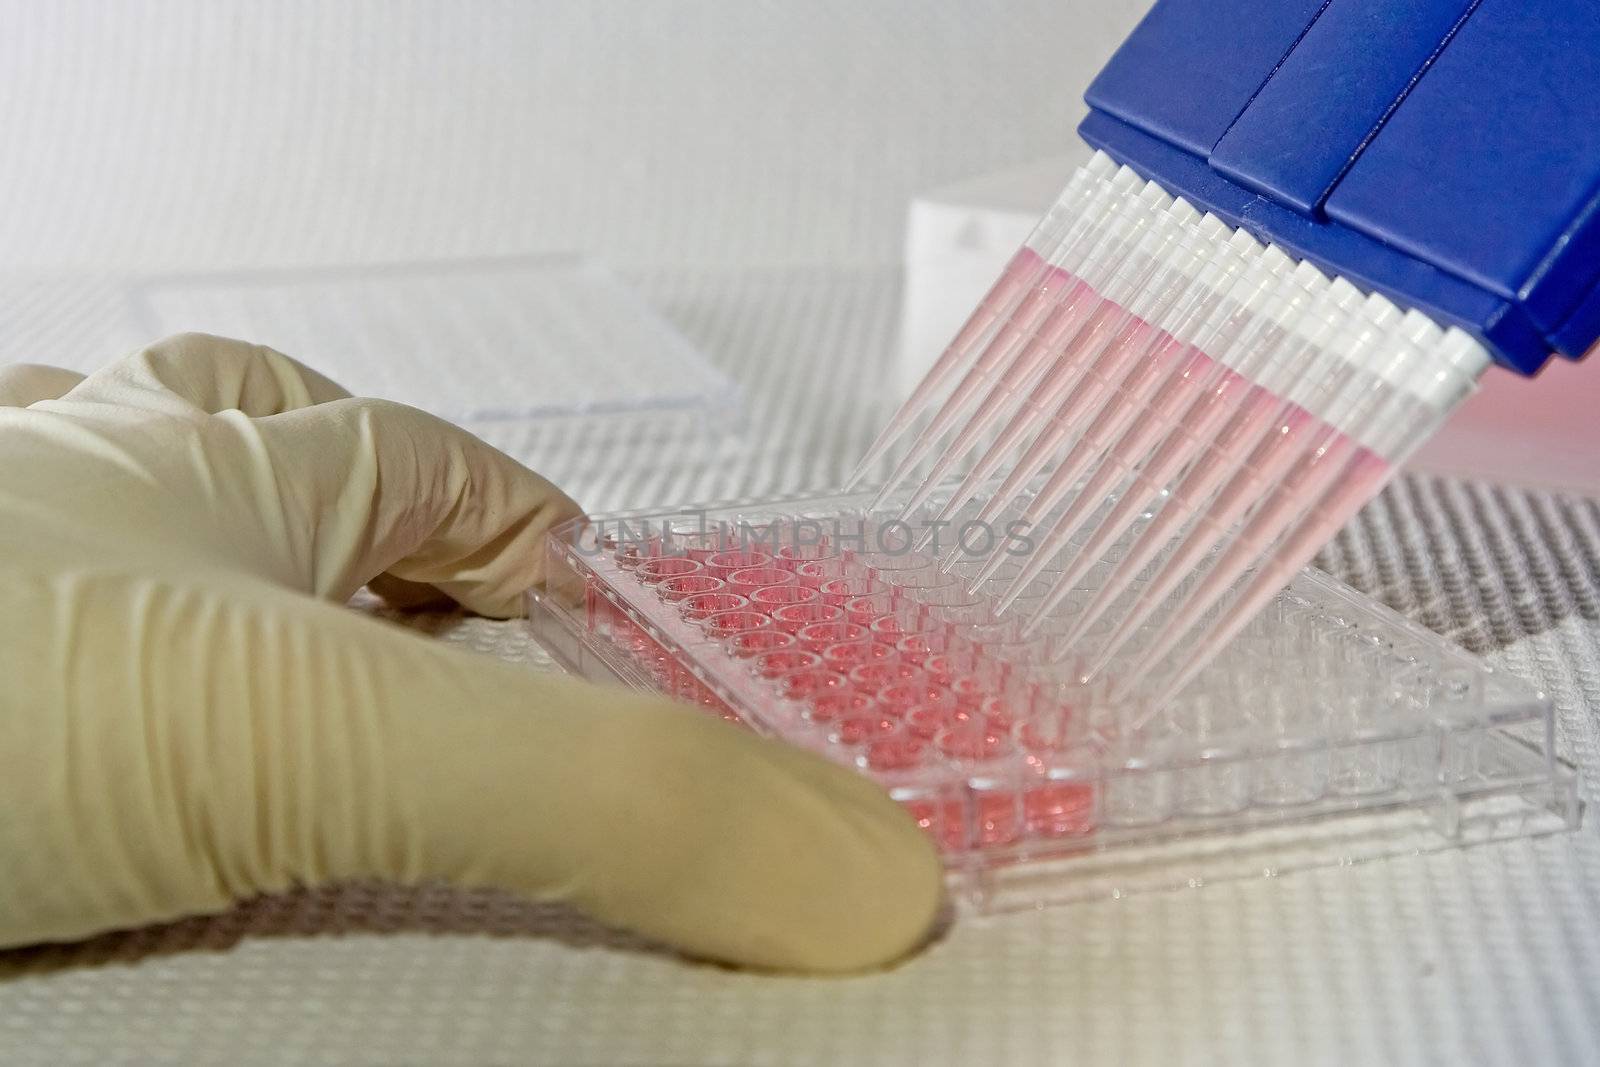 Scientist using blue multi-channel pipet for pipetting a 96 well plate with pink solution on white